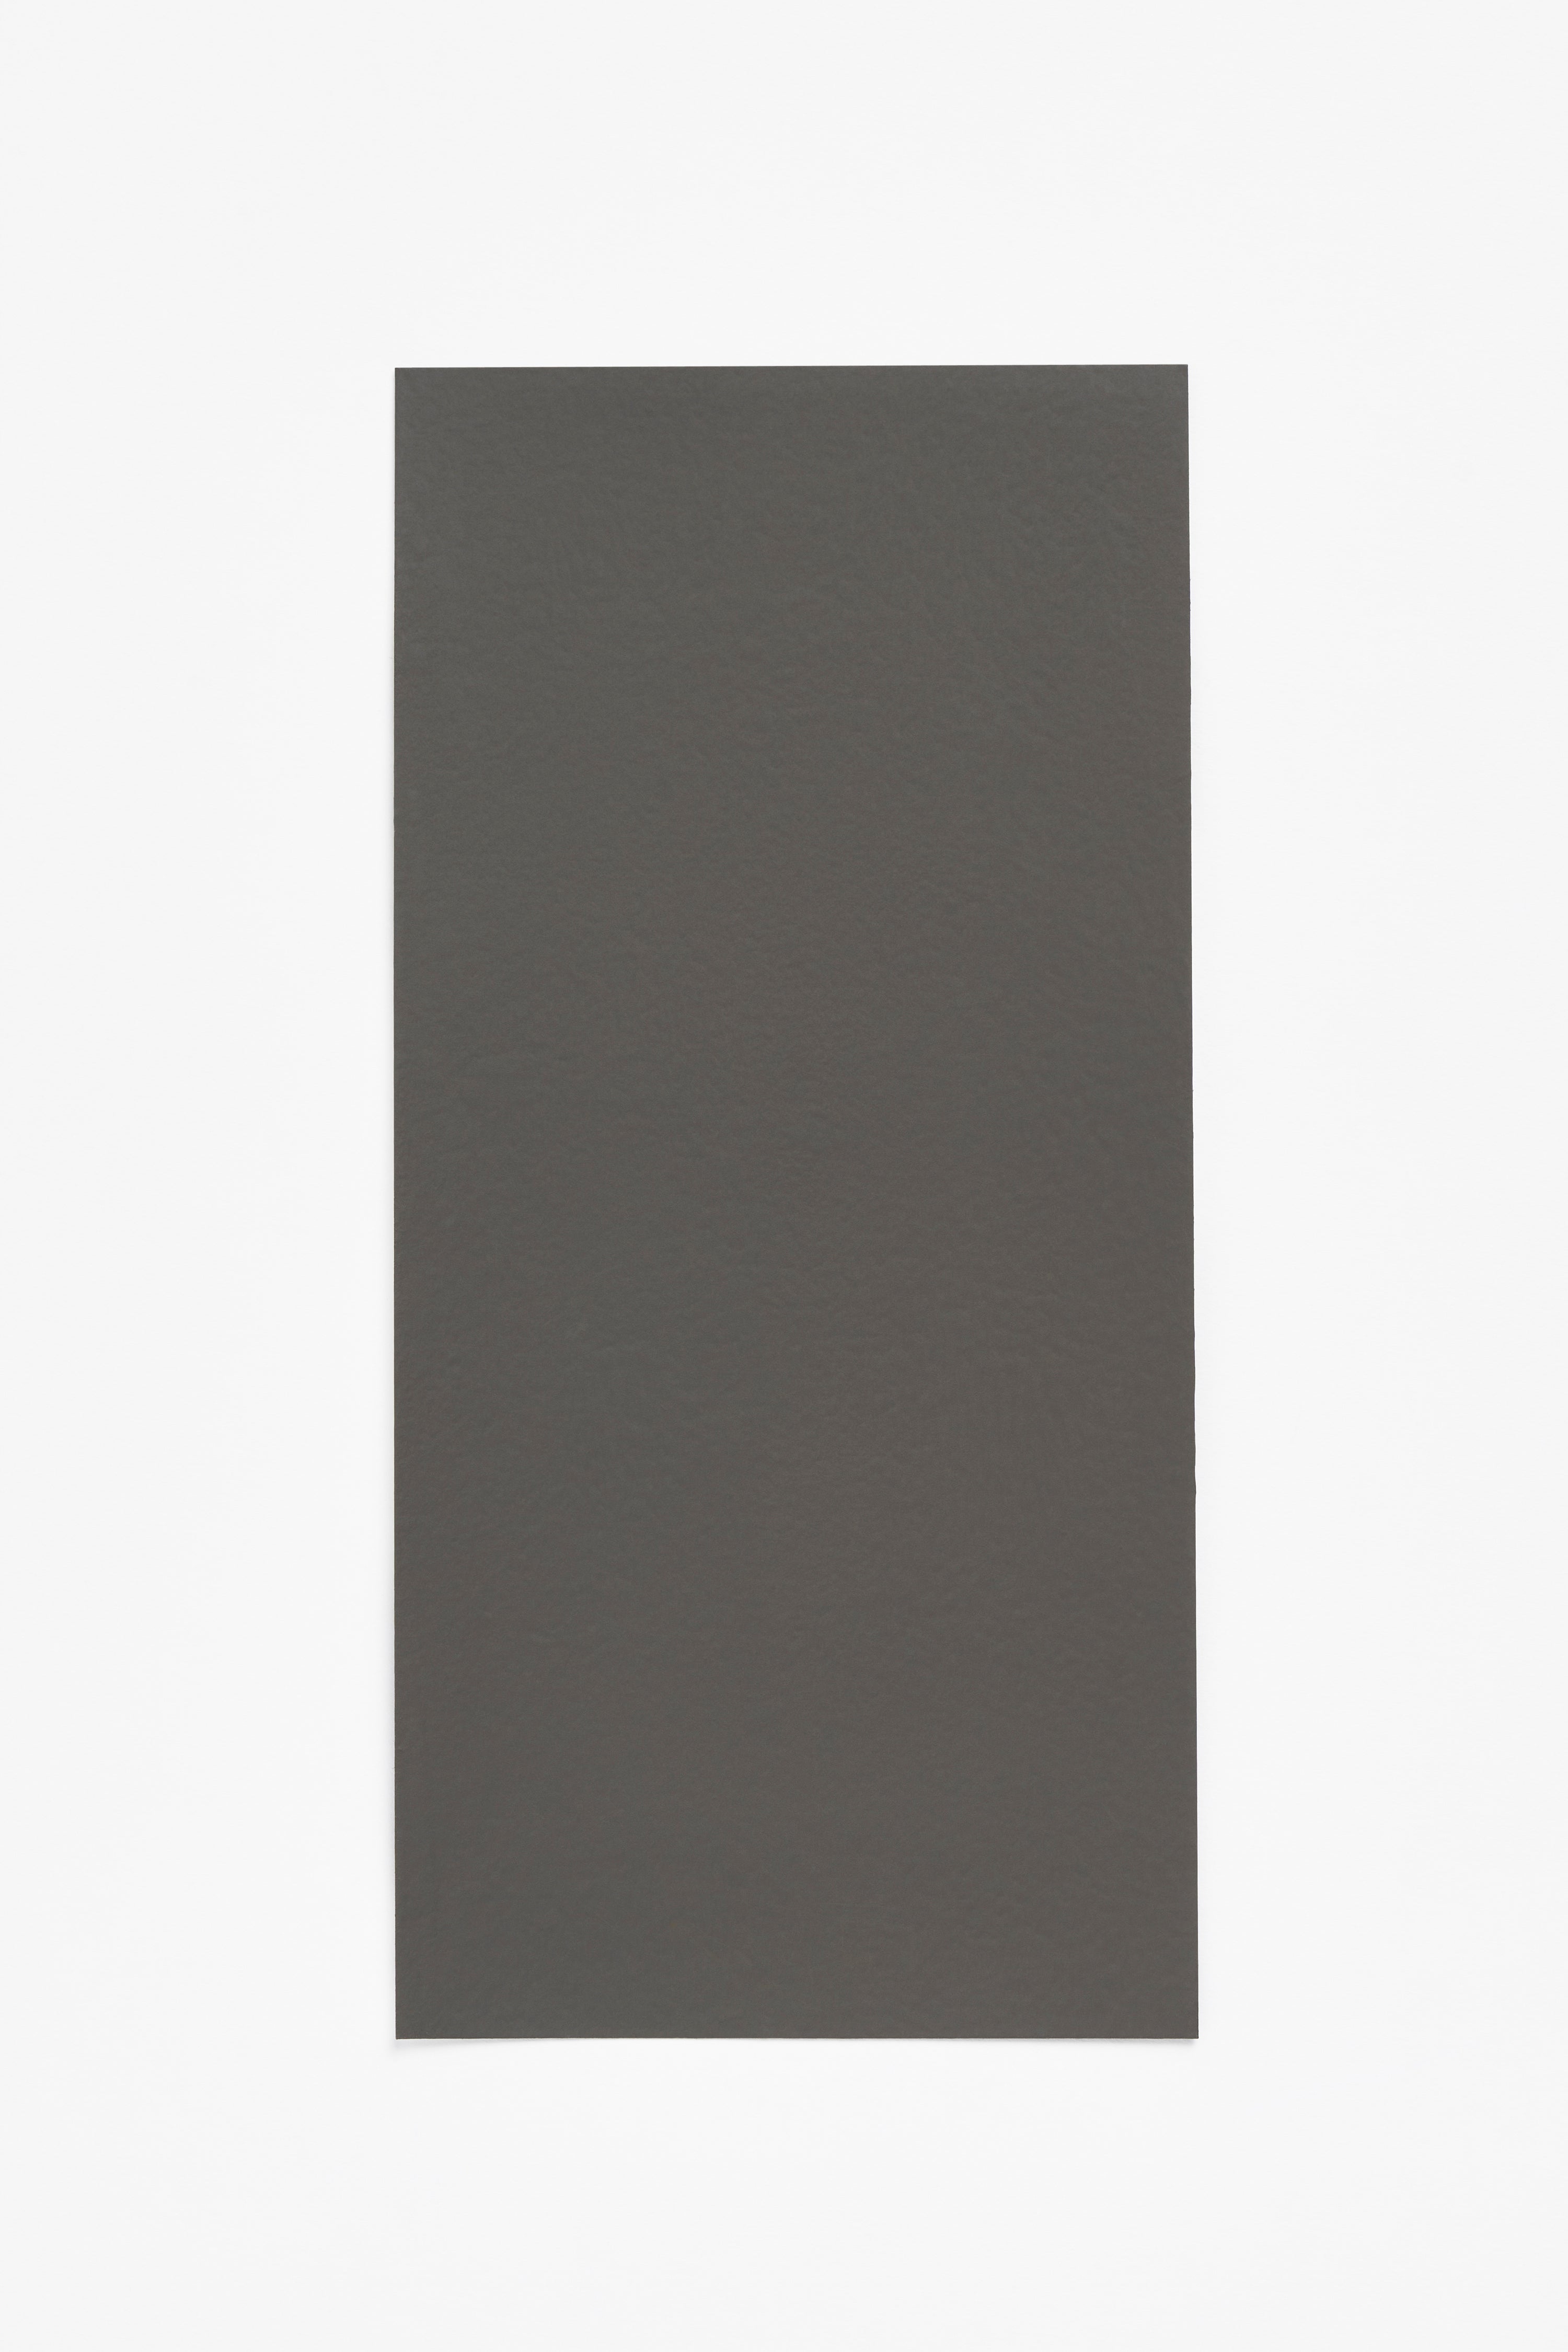 Weathered Bark '— a paint colour developed by Norm Architects for Blēo